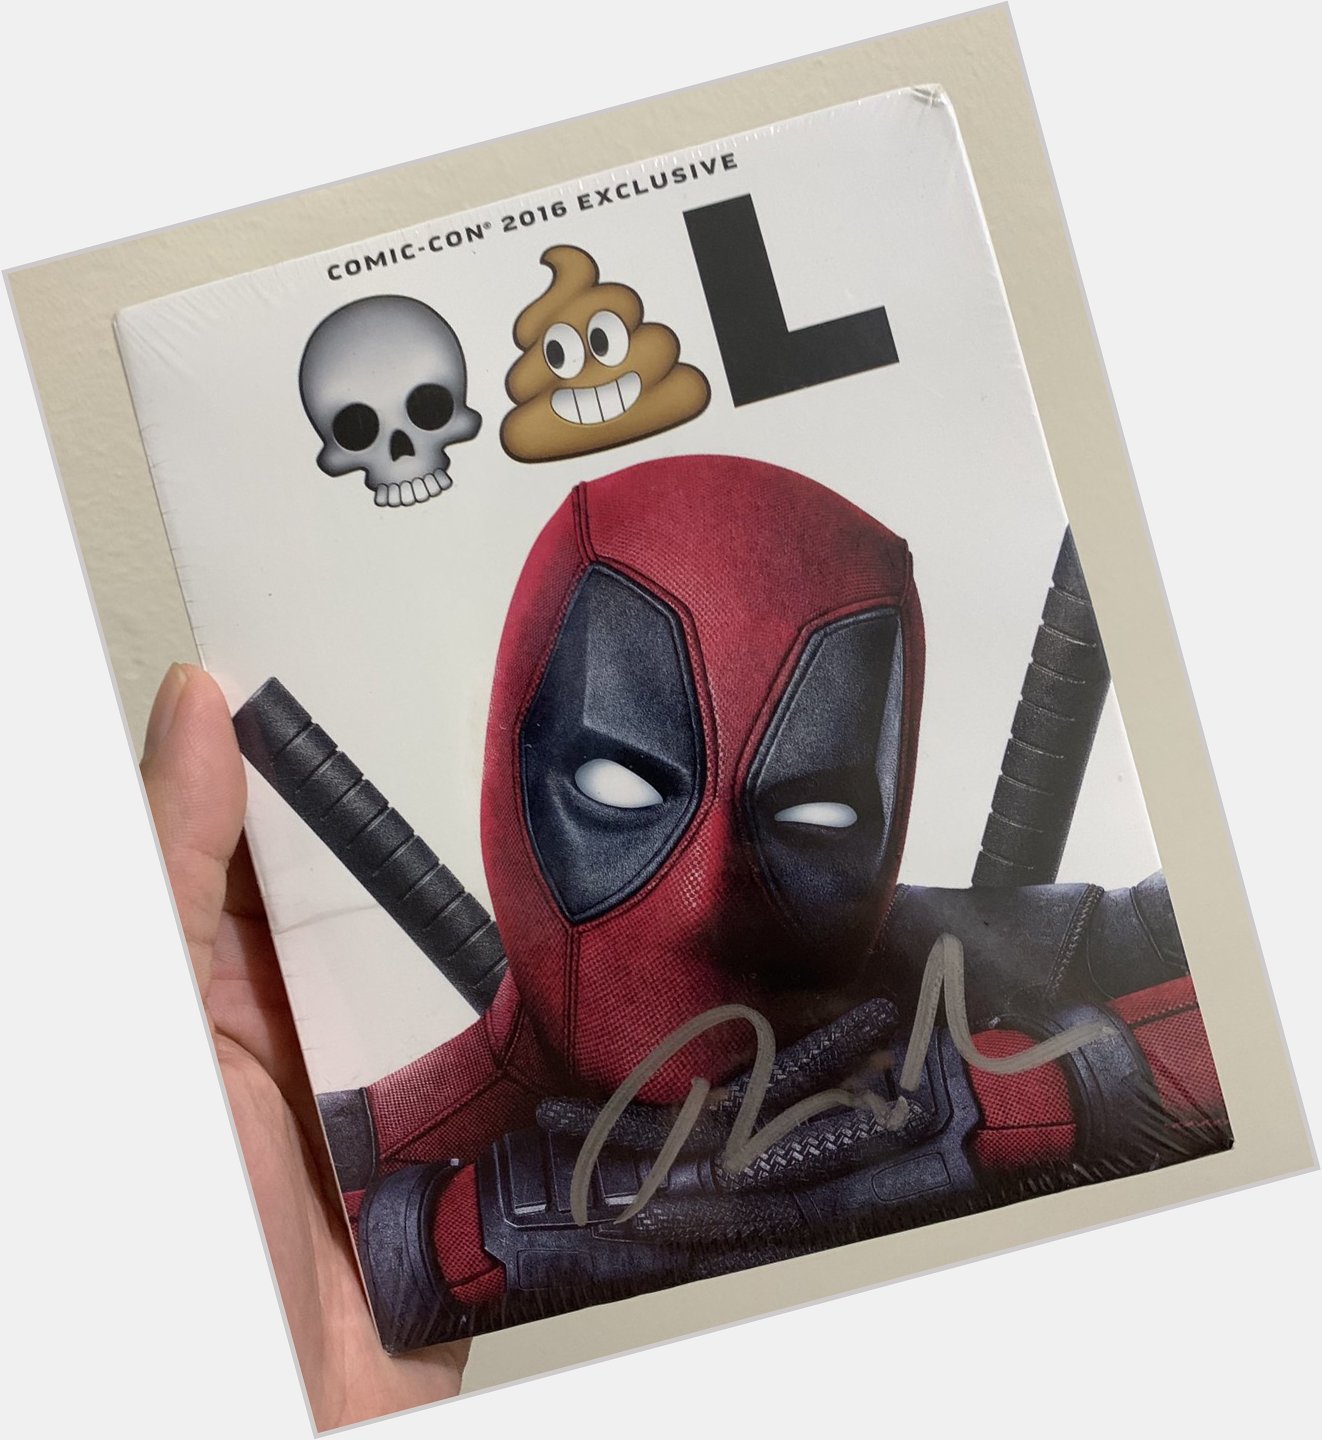 2016 SDCC Exclusive Deadpool Blu-Ray, signed by Ryan Reynolds.  Belated happy birthday! 